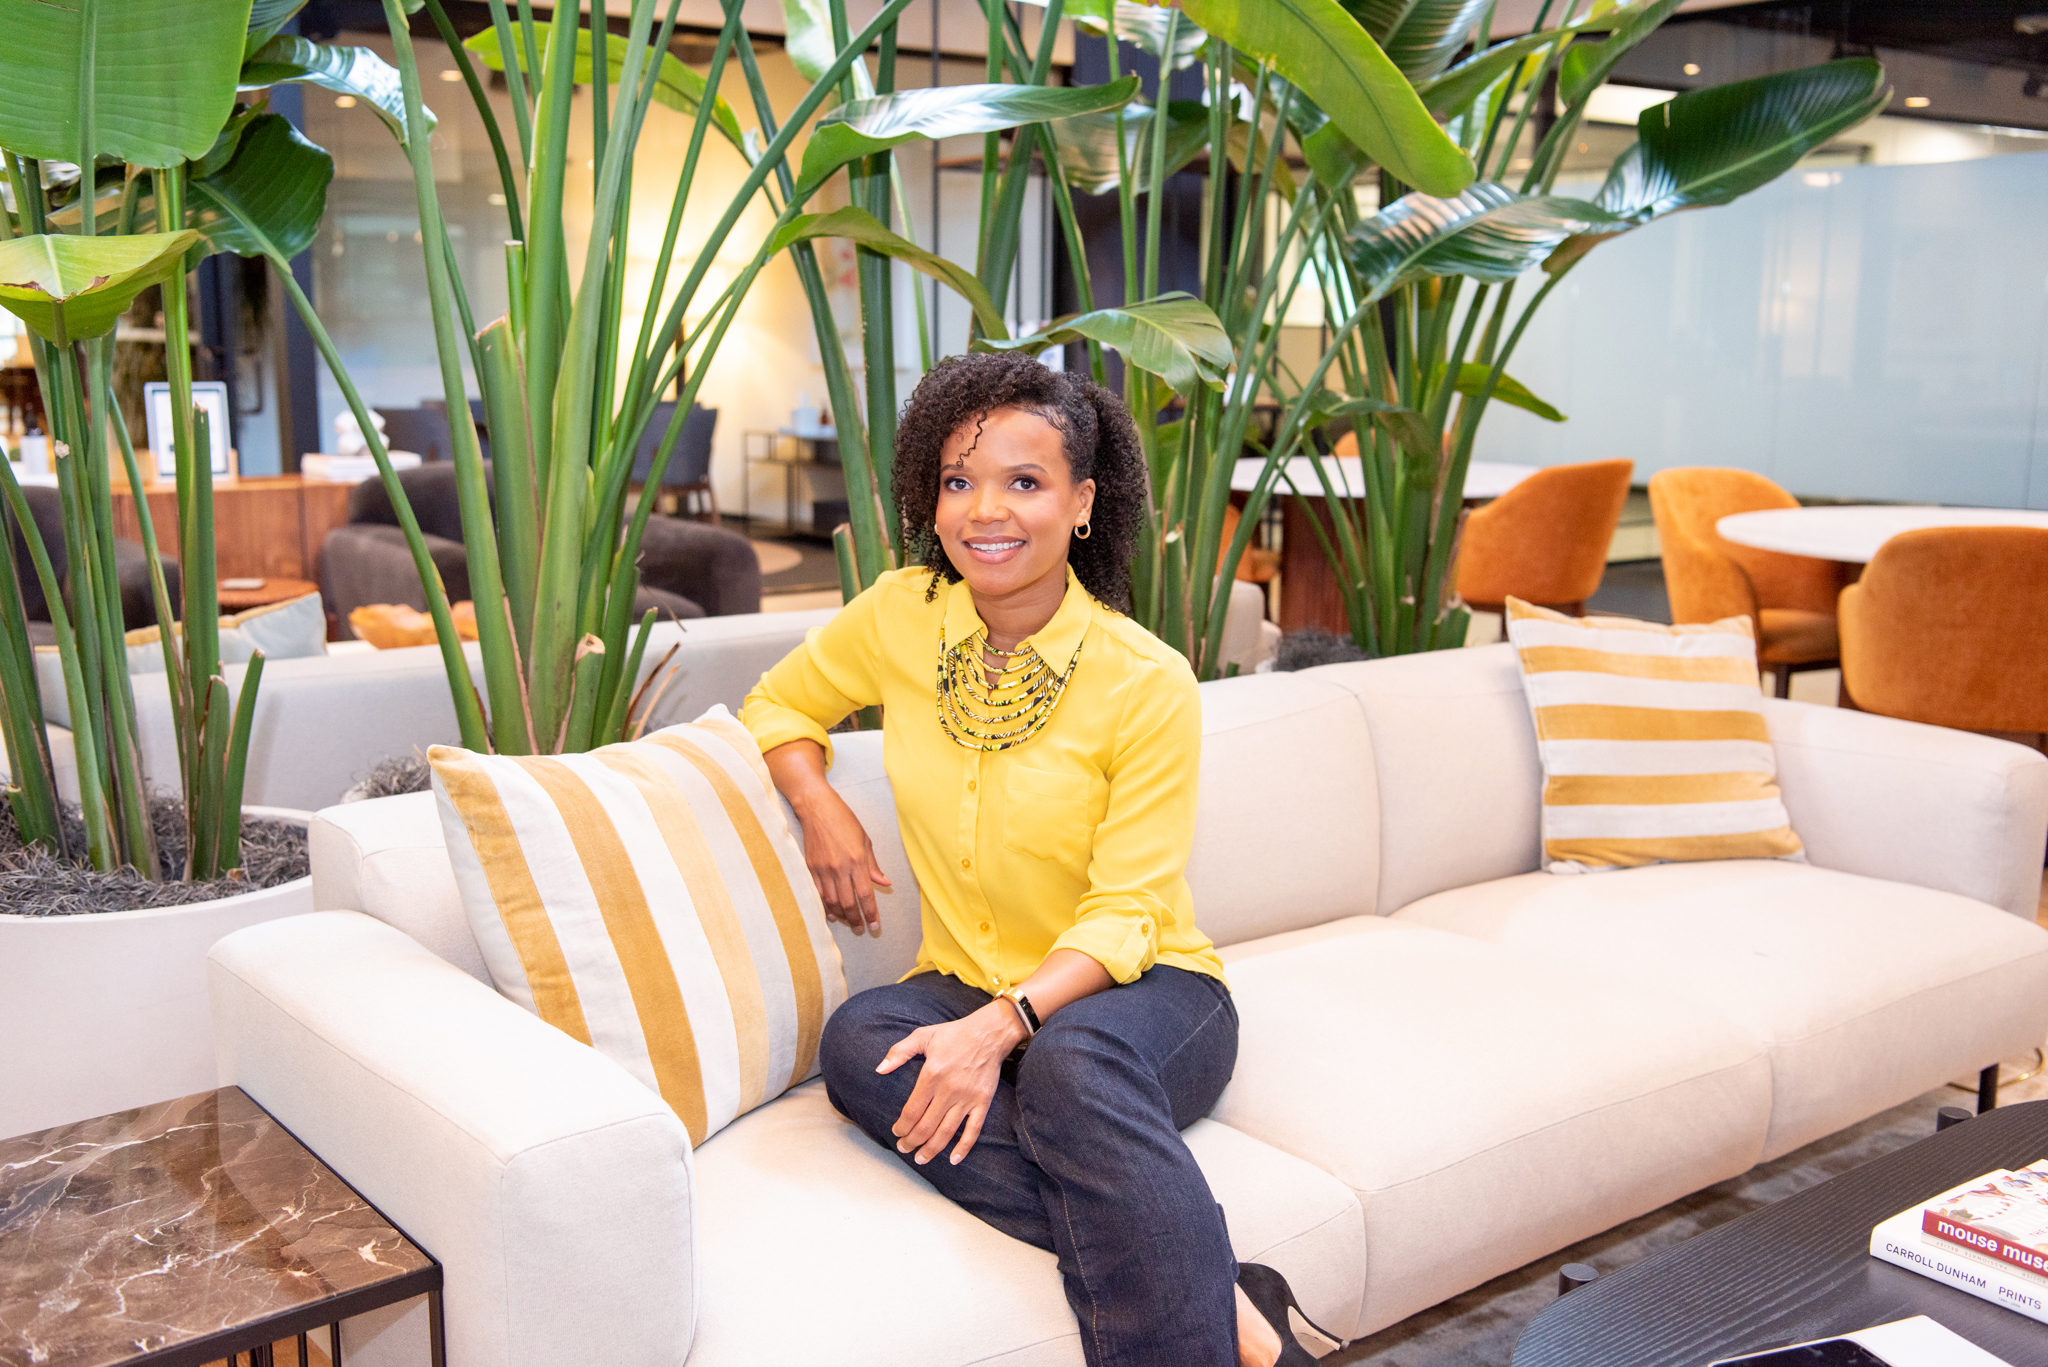 An African American woman sitting on a couch posing for her branding photoshoot.